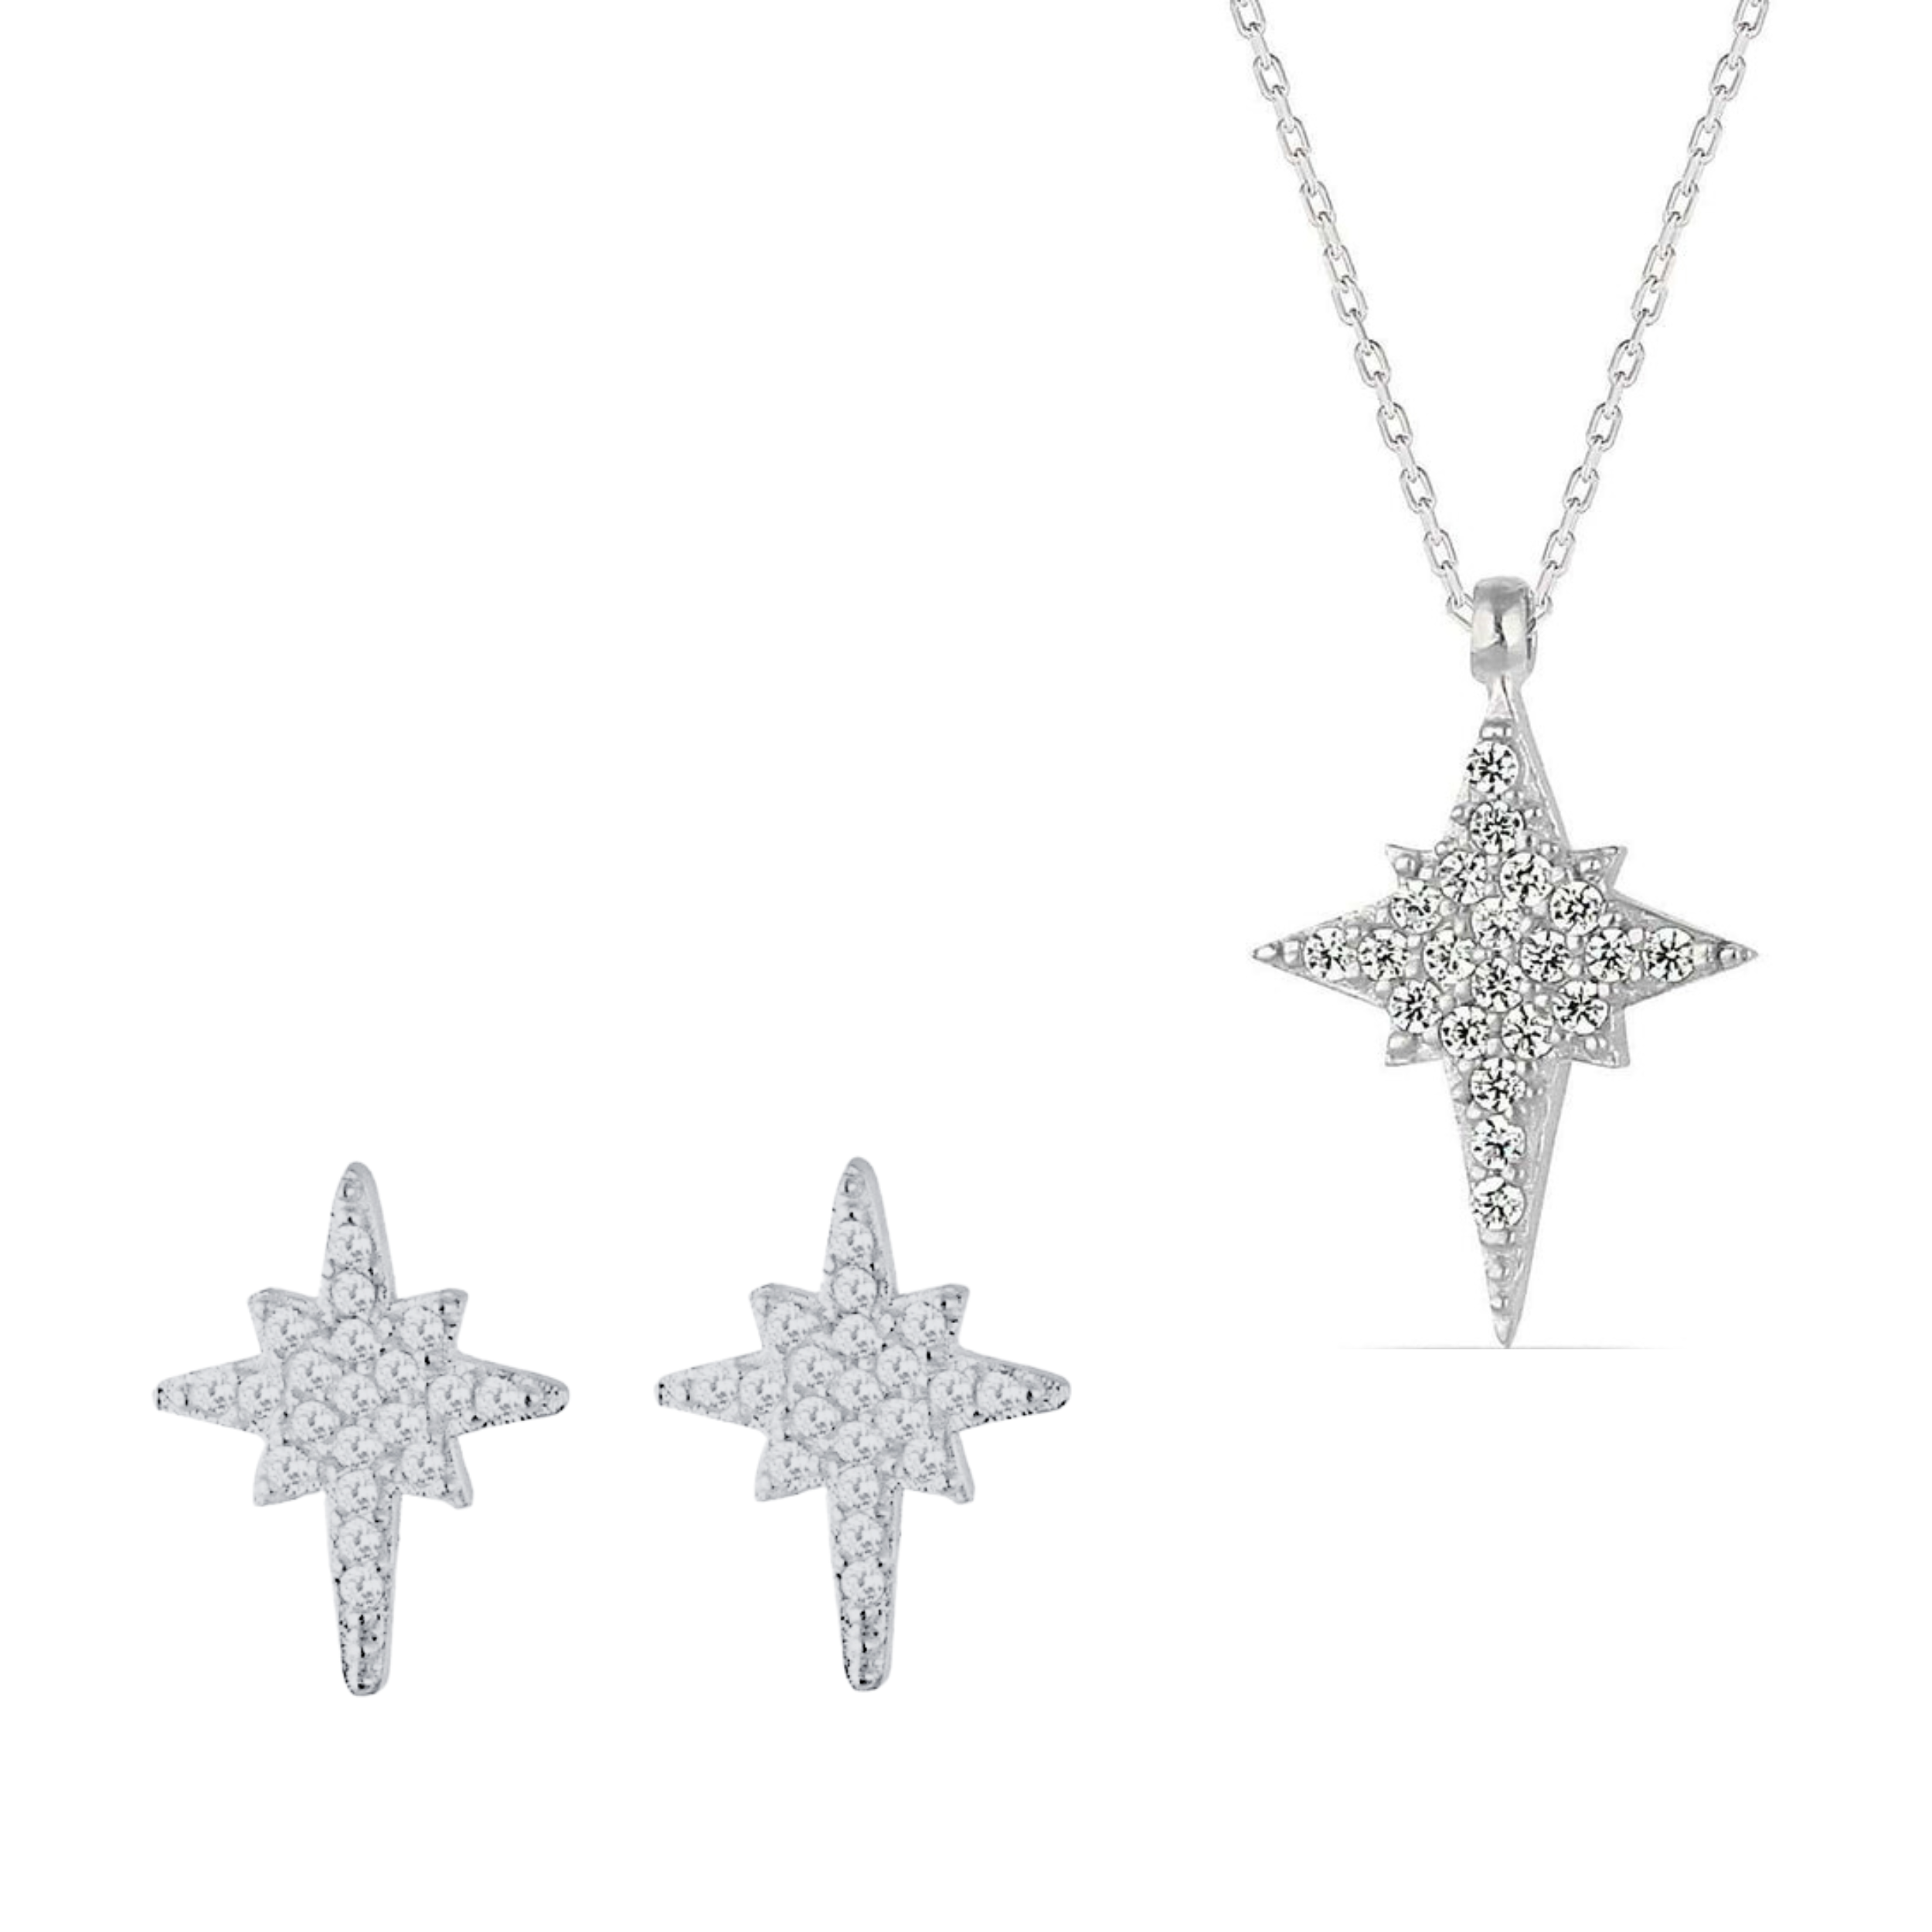 Northern Star Polaris Sterling Silver Necklace and Stud Earring Set